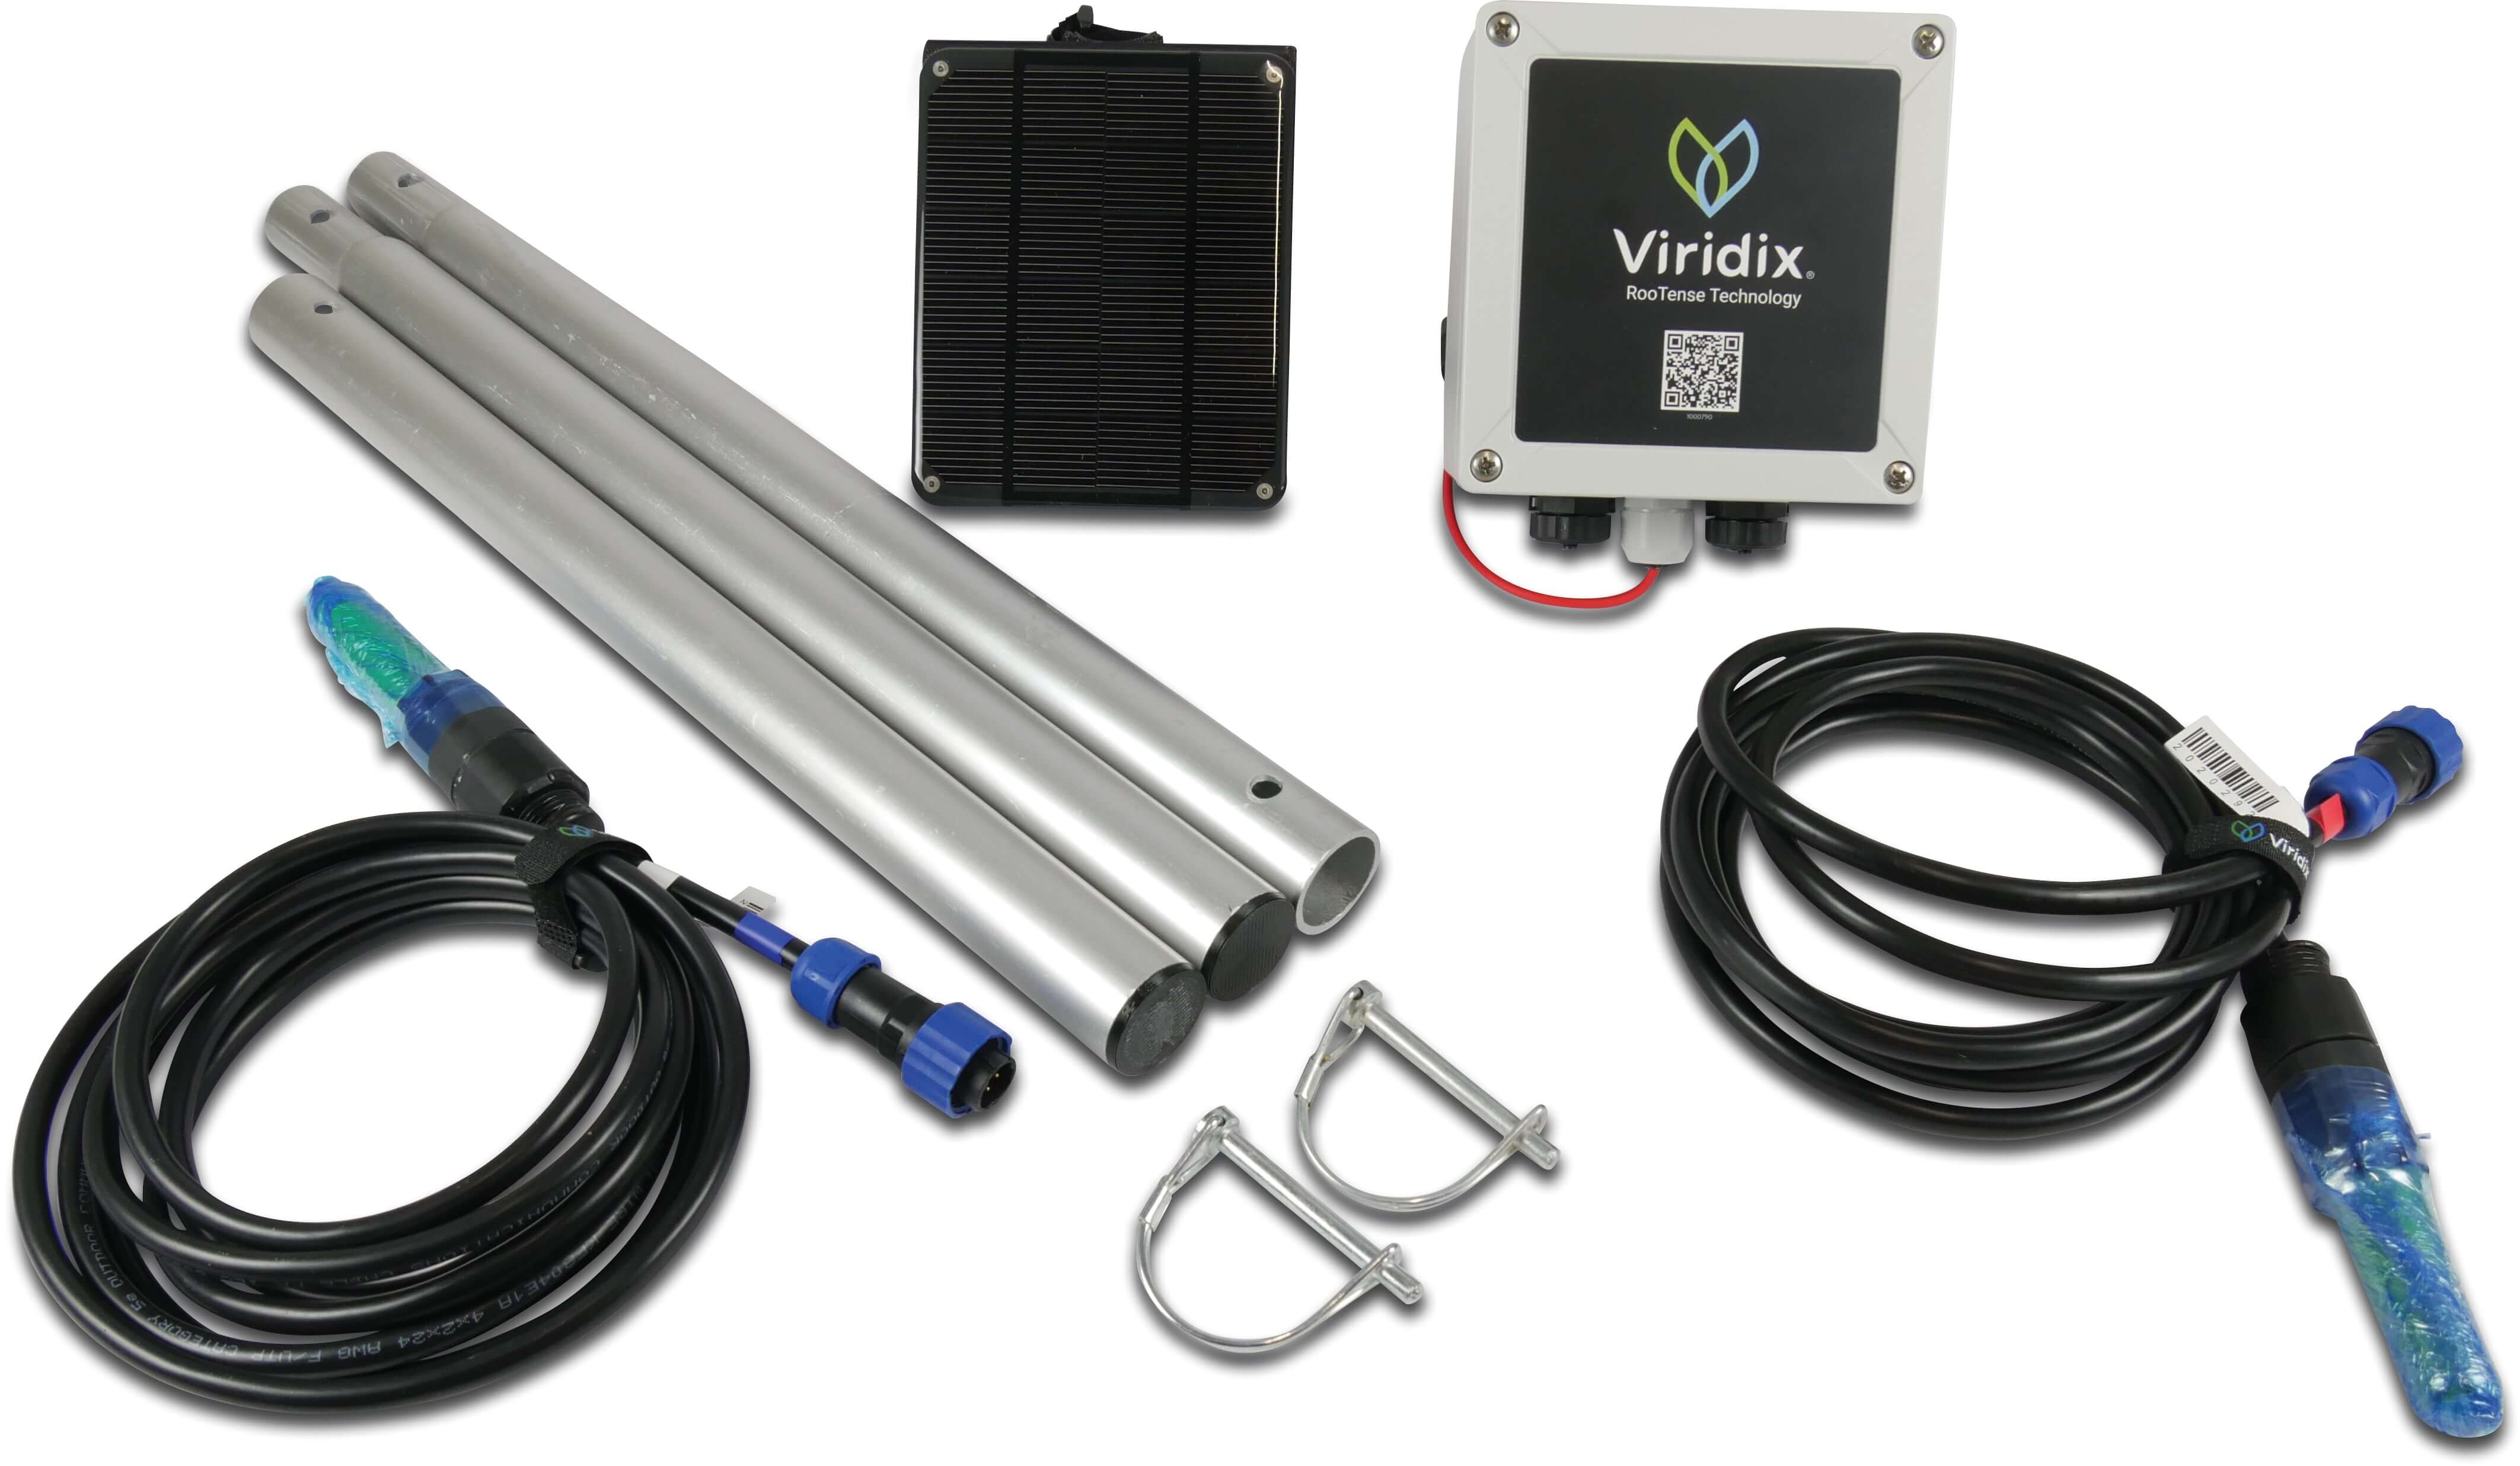 Viridix Gen2 system includes Iot device, 2 RooTense sensors, installation kit and 1 year subscription type Rootense 2 sensorer